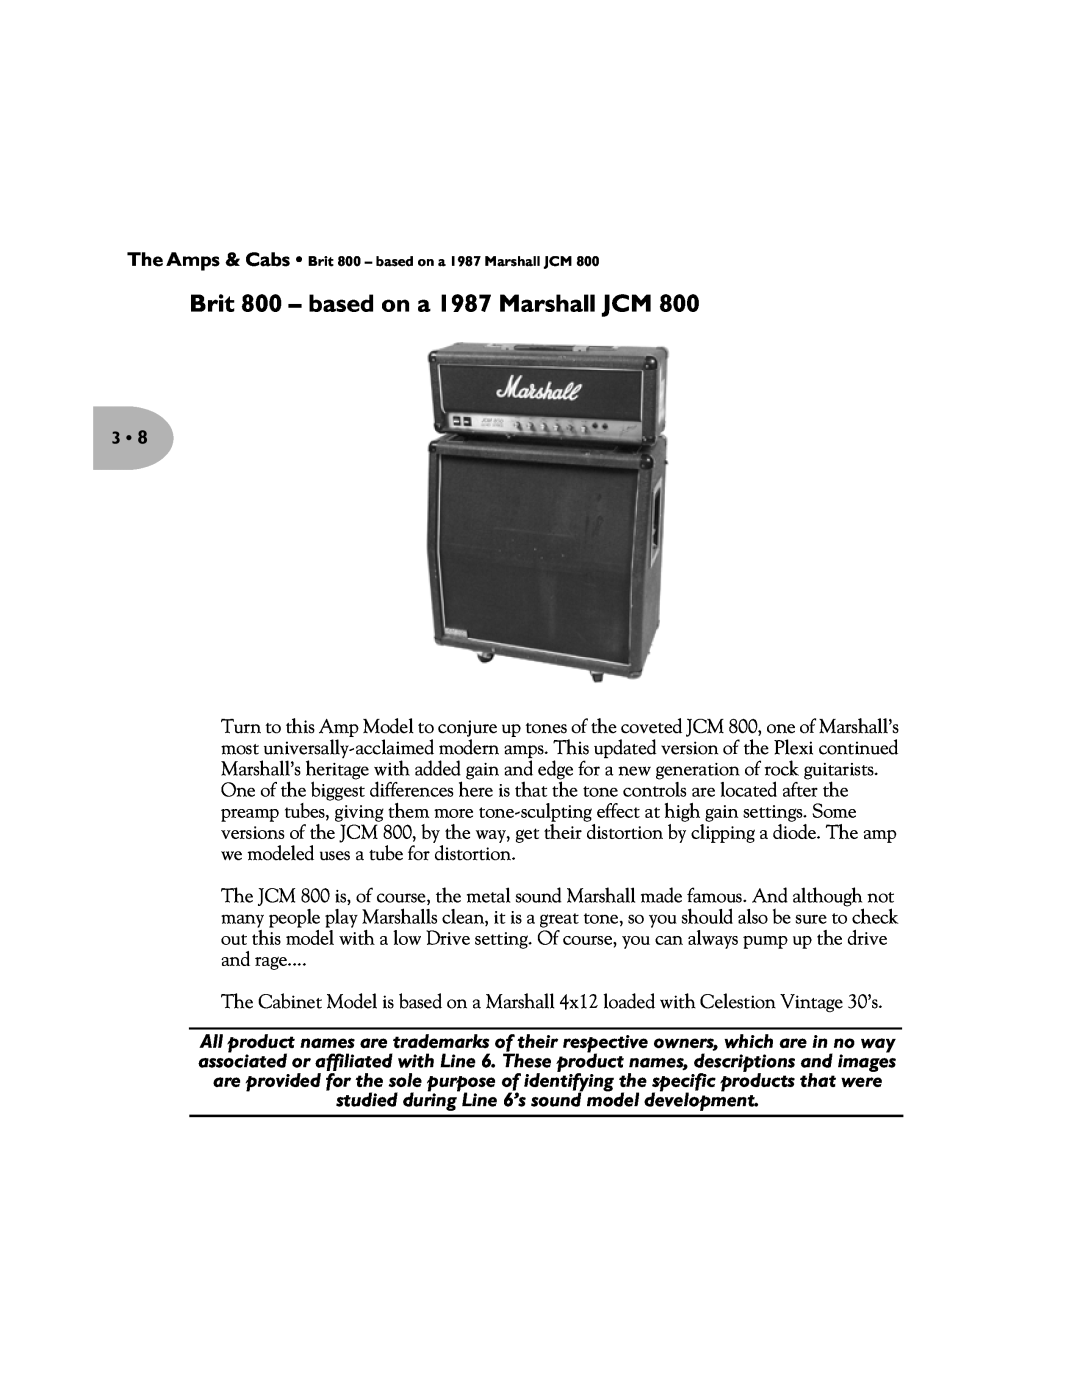 Line 6 Pilot's Handbook manual The Amps & Cabs Brit 800 - based on a 1987 Marshall JCM 